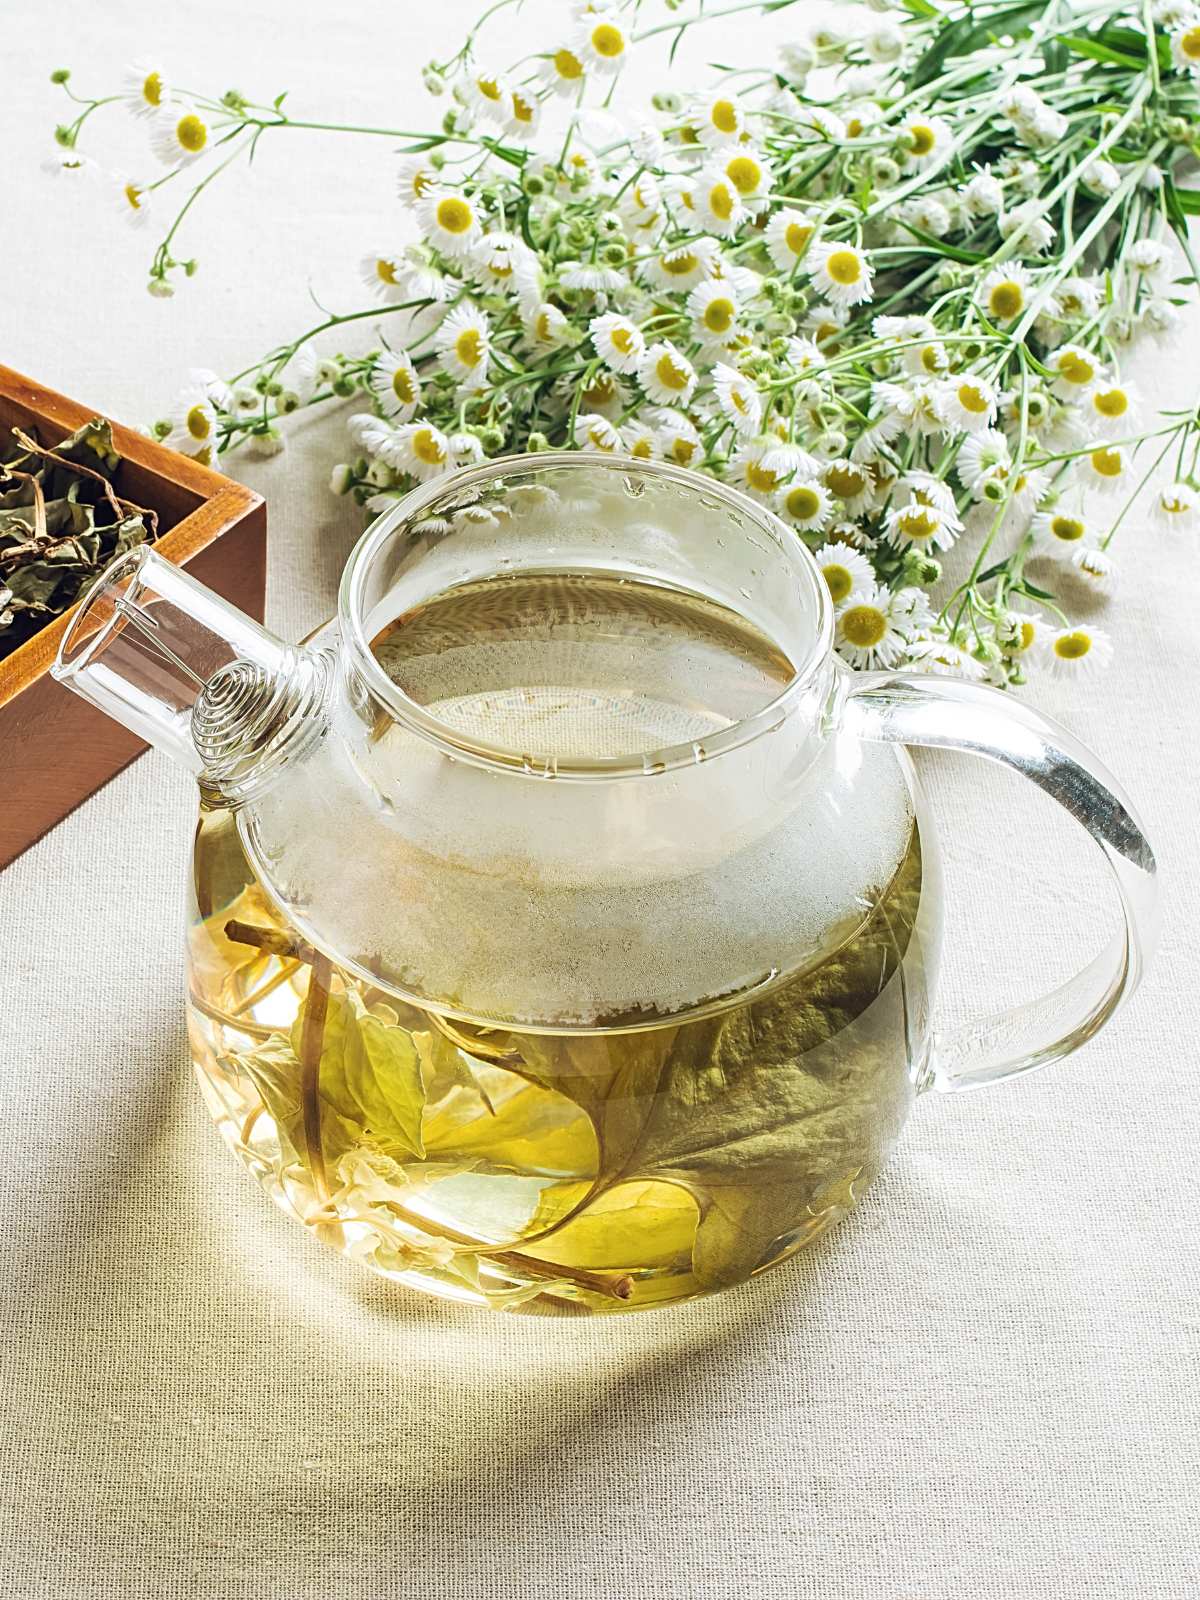 A glass pitcher filled with herbal tea.